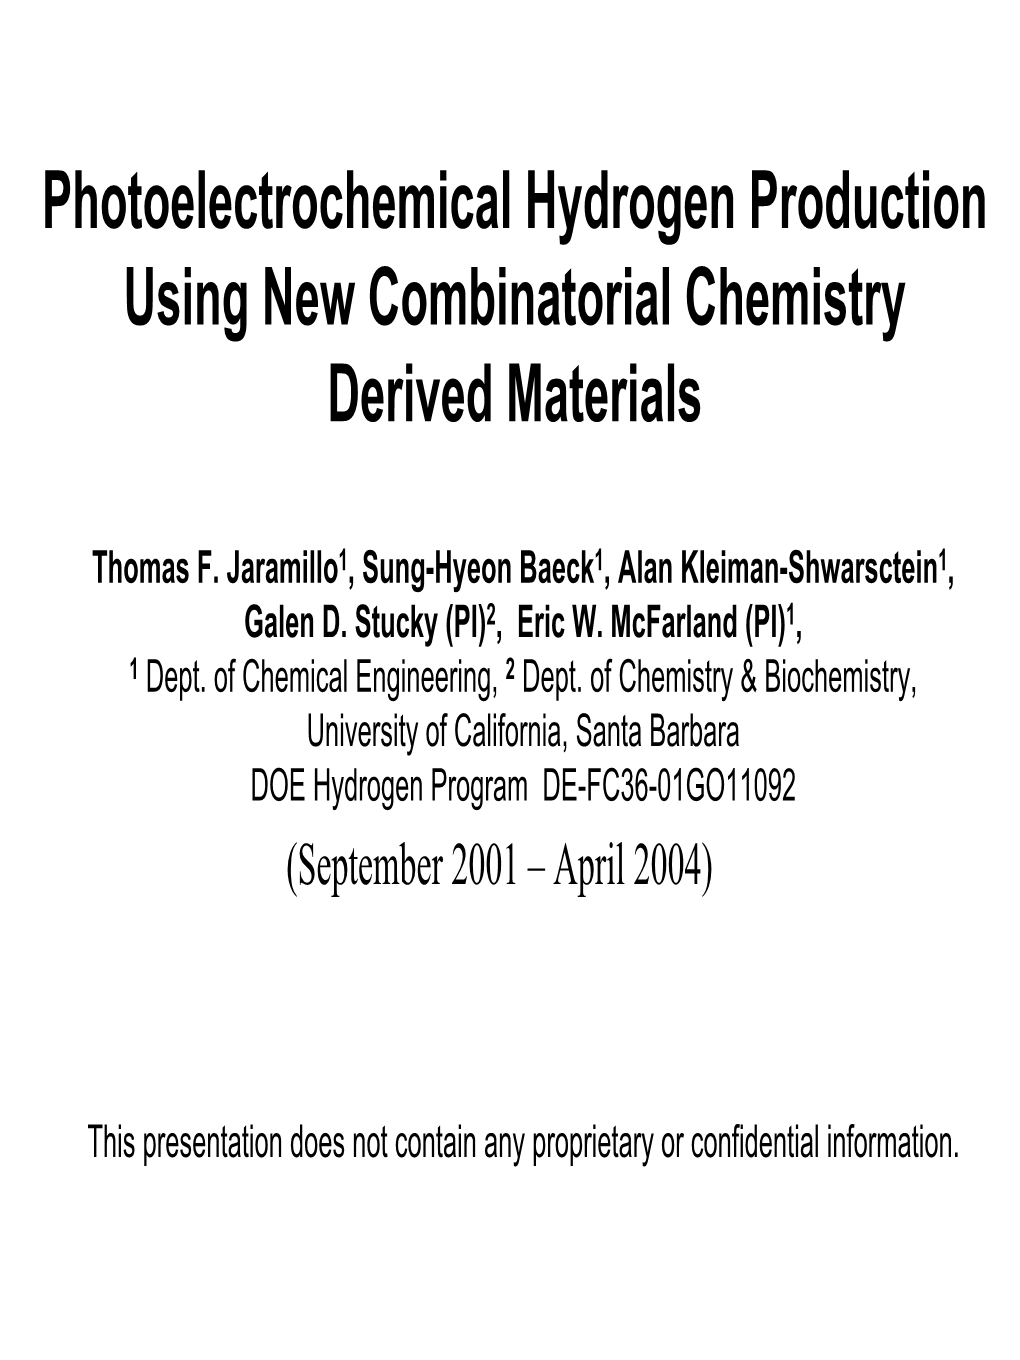 Photoelectrochemical Hydrogen Production Using New Combinatorial Chemistry Derived Materials